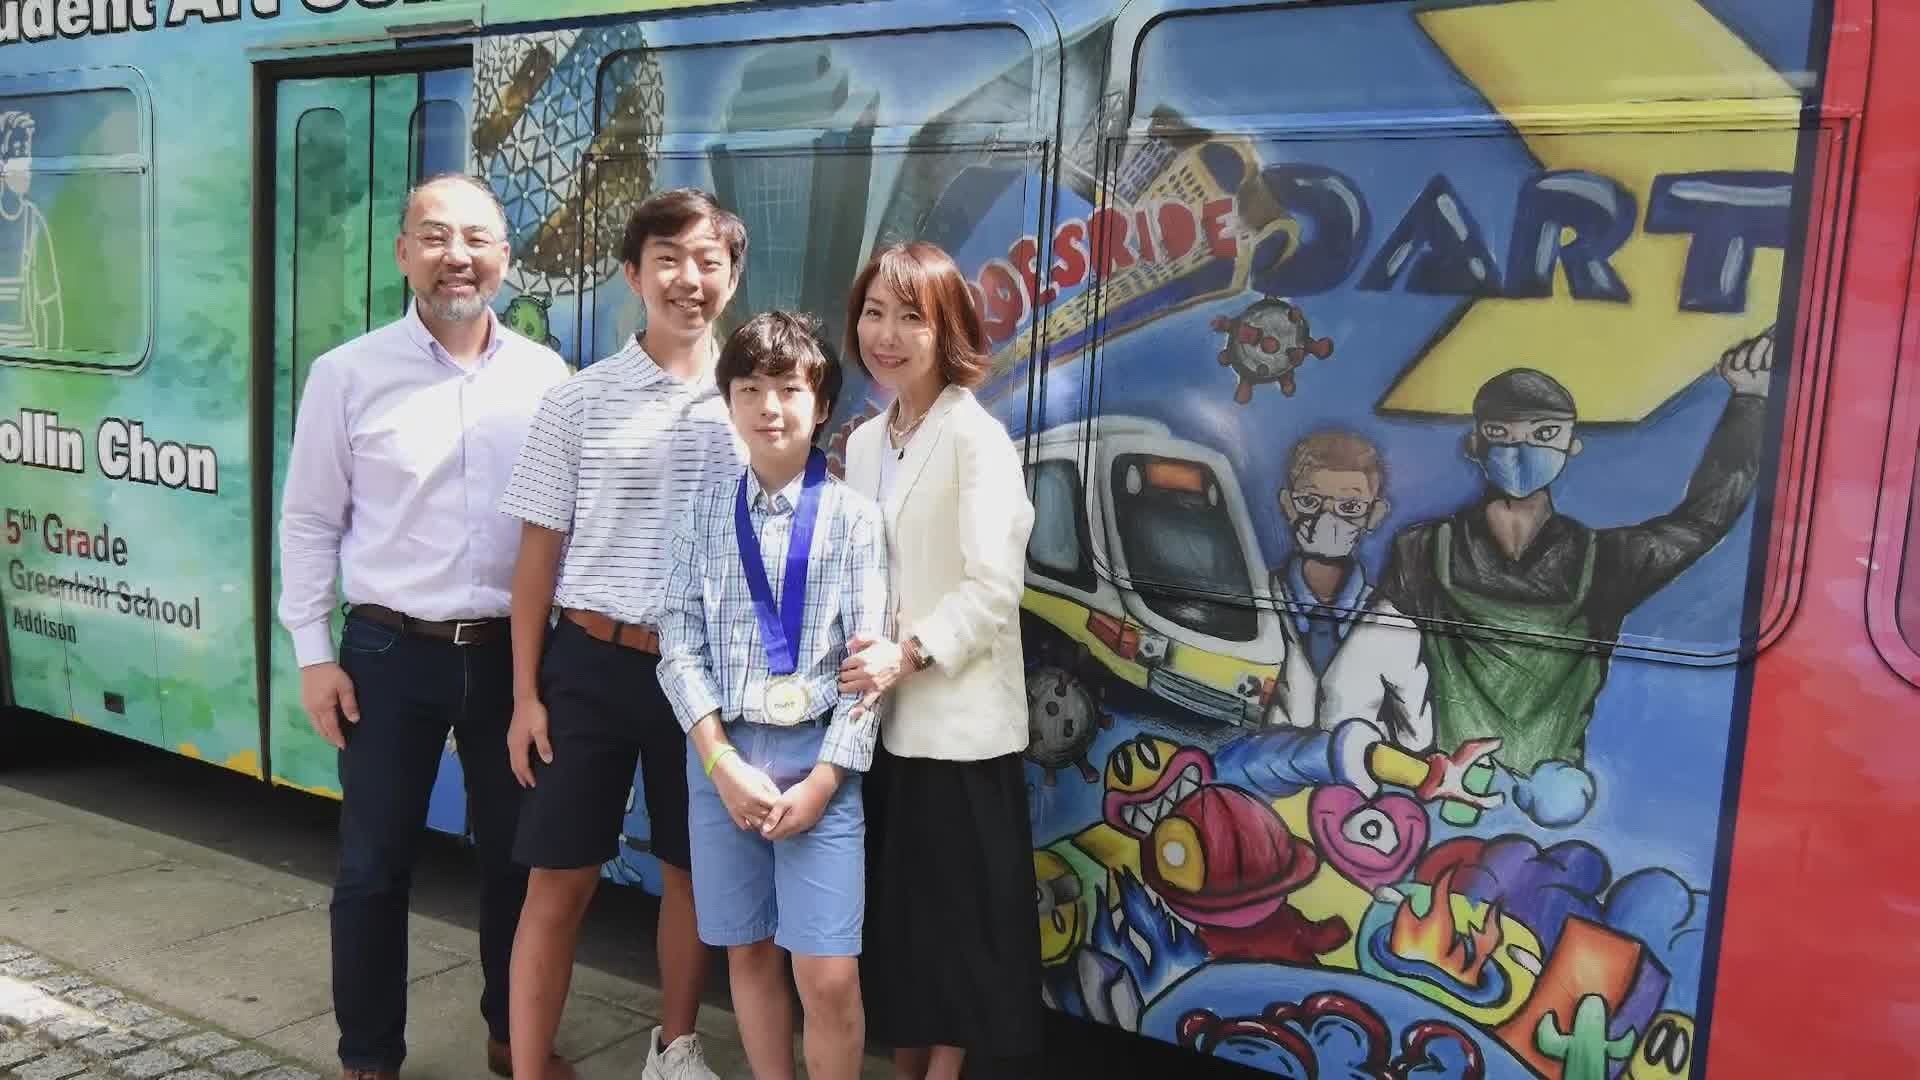 11-year-old Collin Chon's winning artwork was selected from 688 entries from students in kindergarten through 12th grade. The theme was “Everyday Heroes Ride DART."